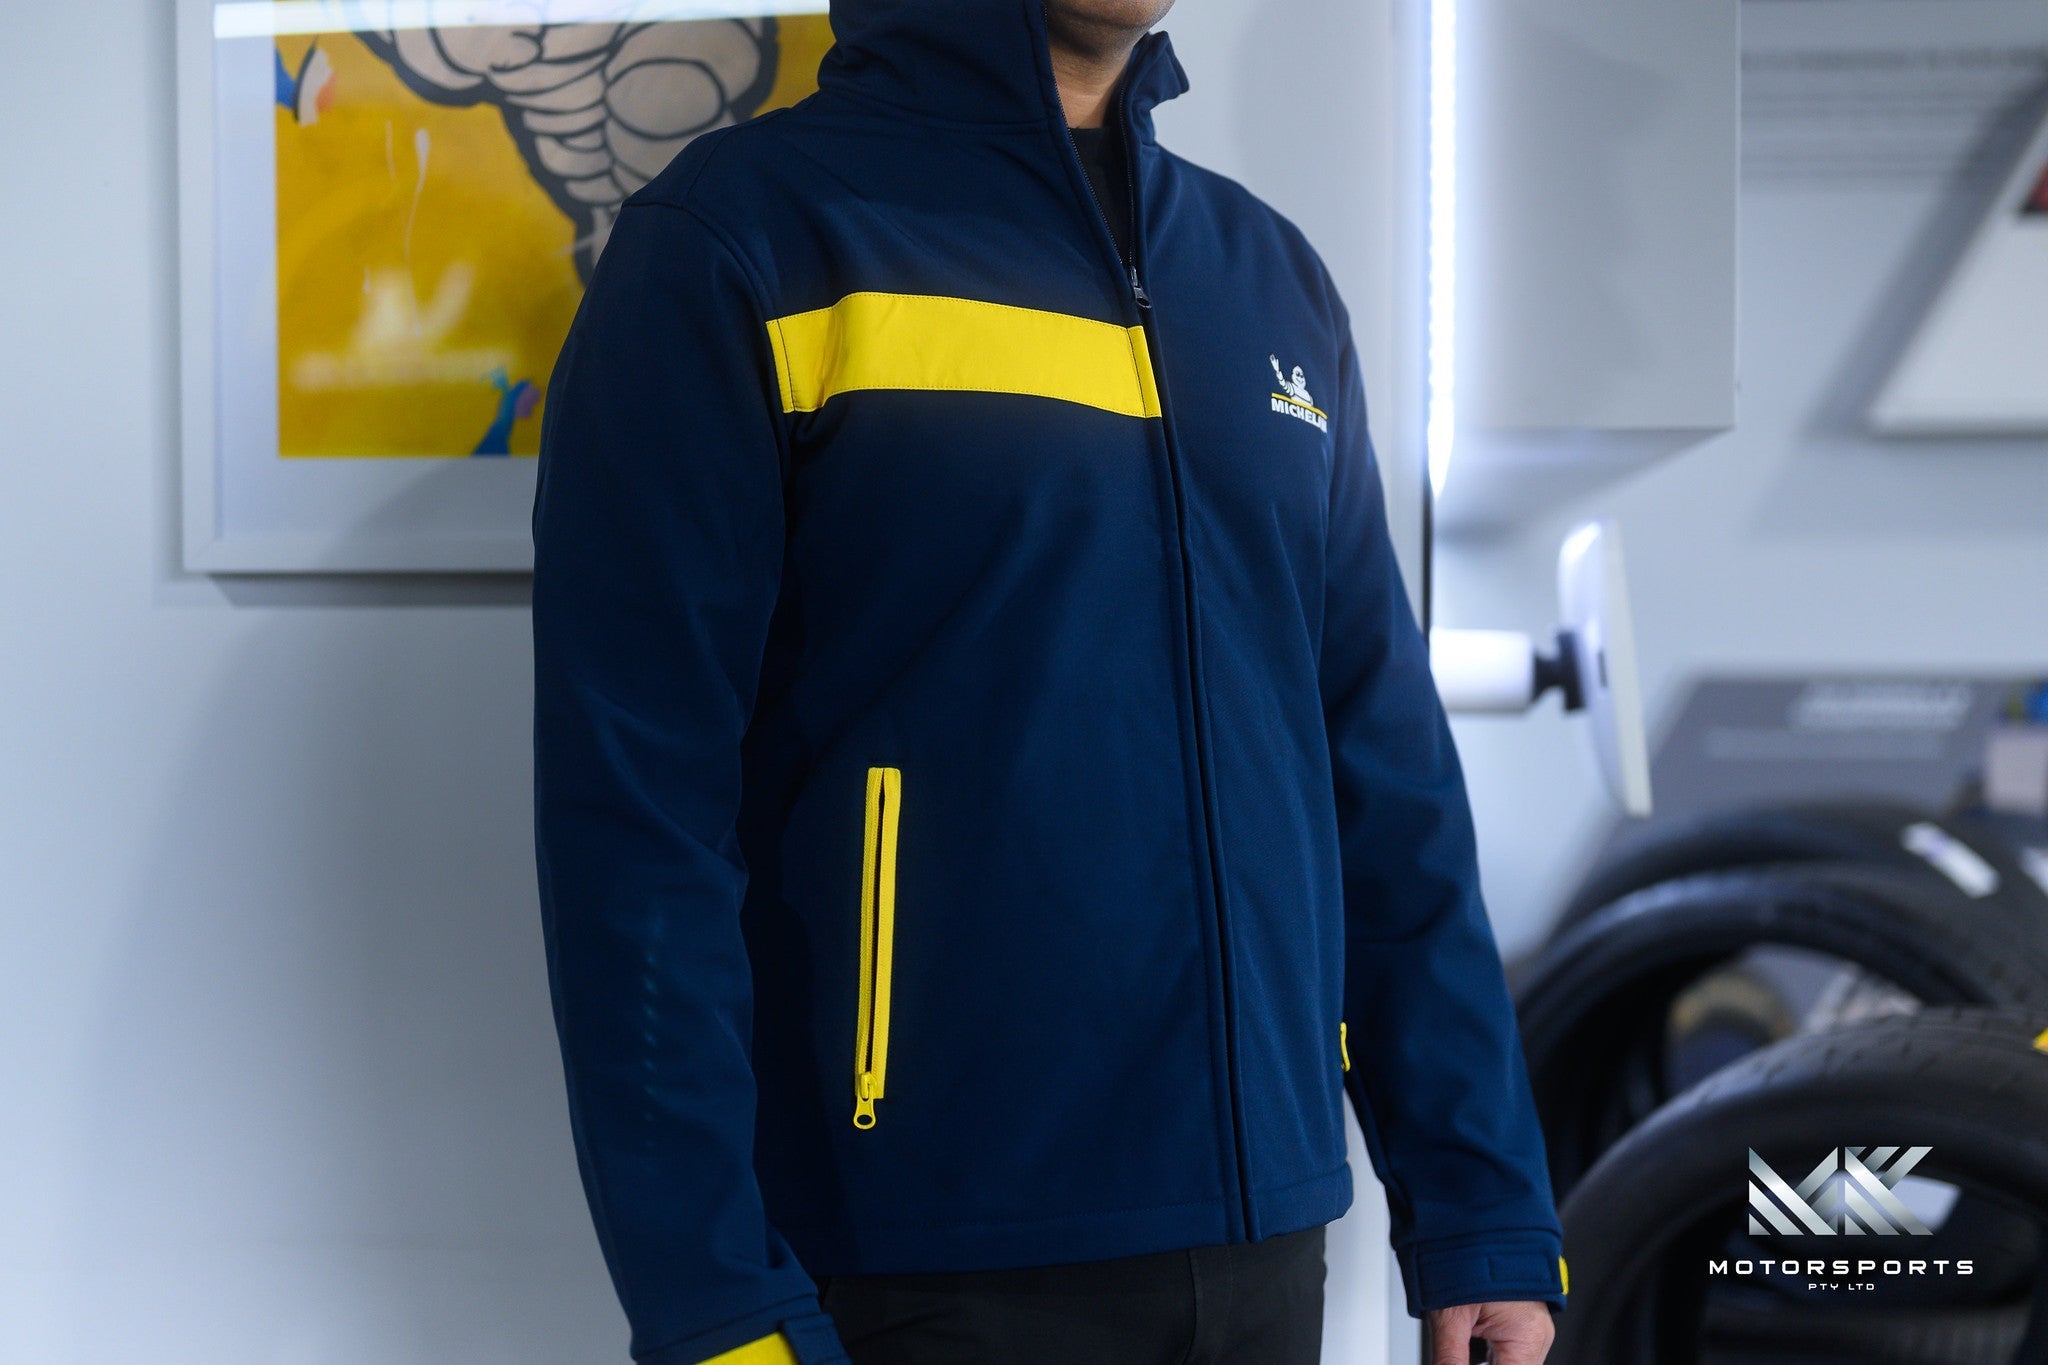 Michelin Motion Softshell Jacket - Premium Merchandise from Merch - From just $99.0! Shop now at MK MOTORSPORTS